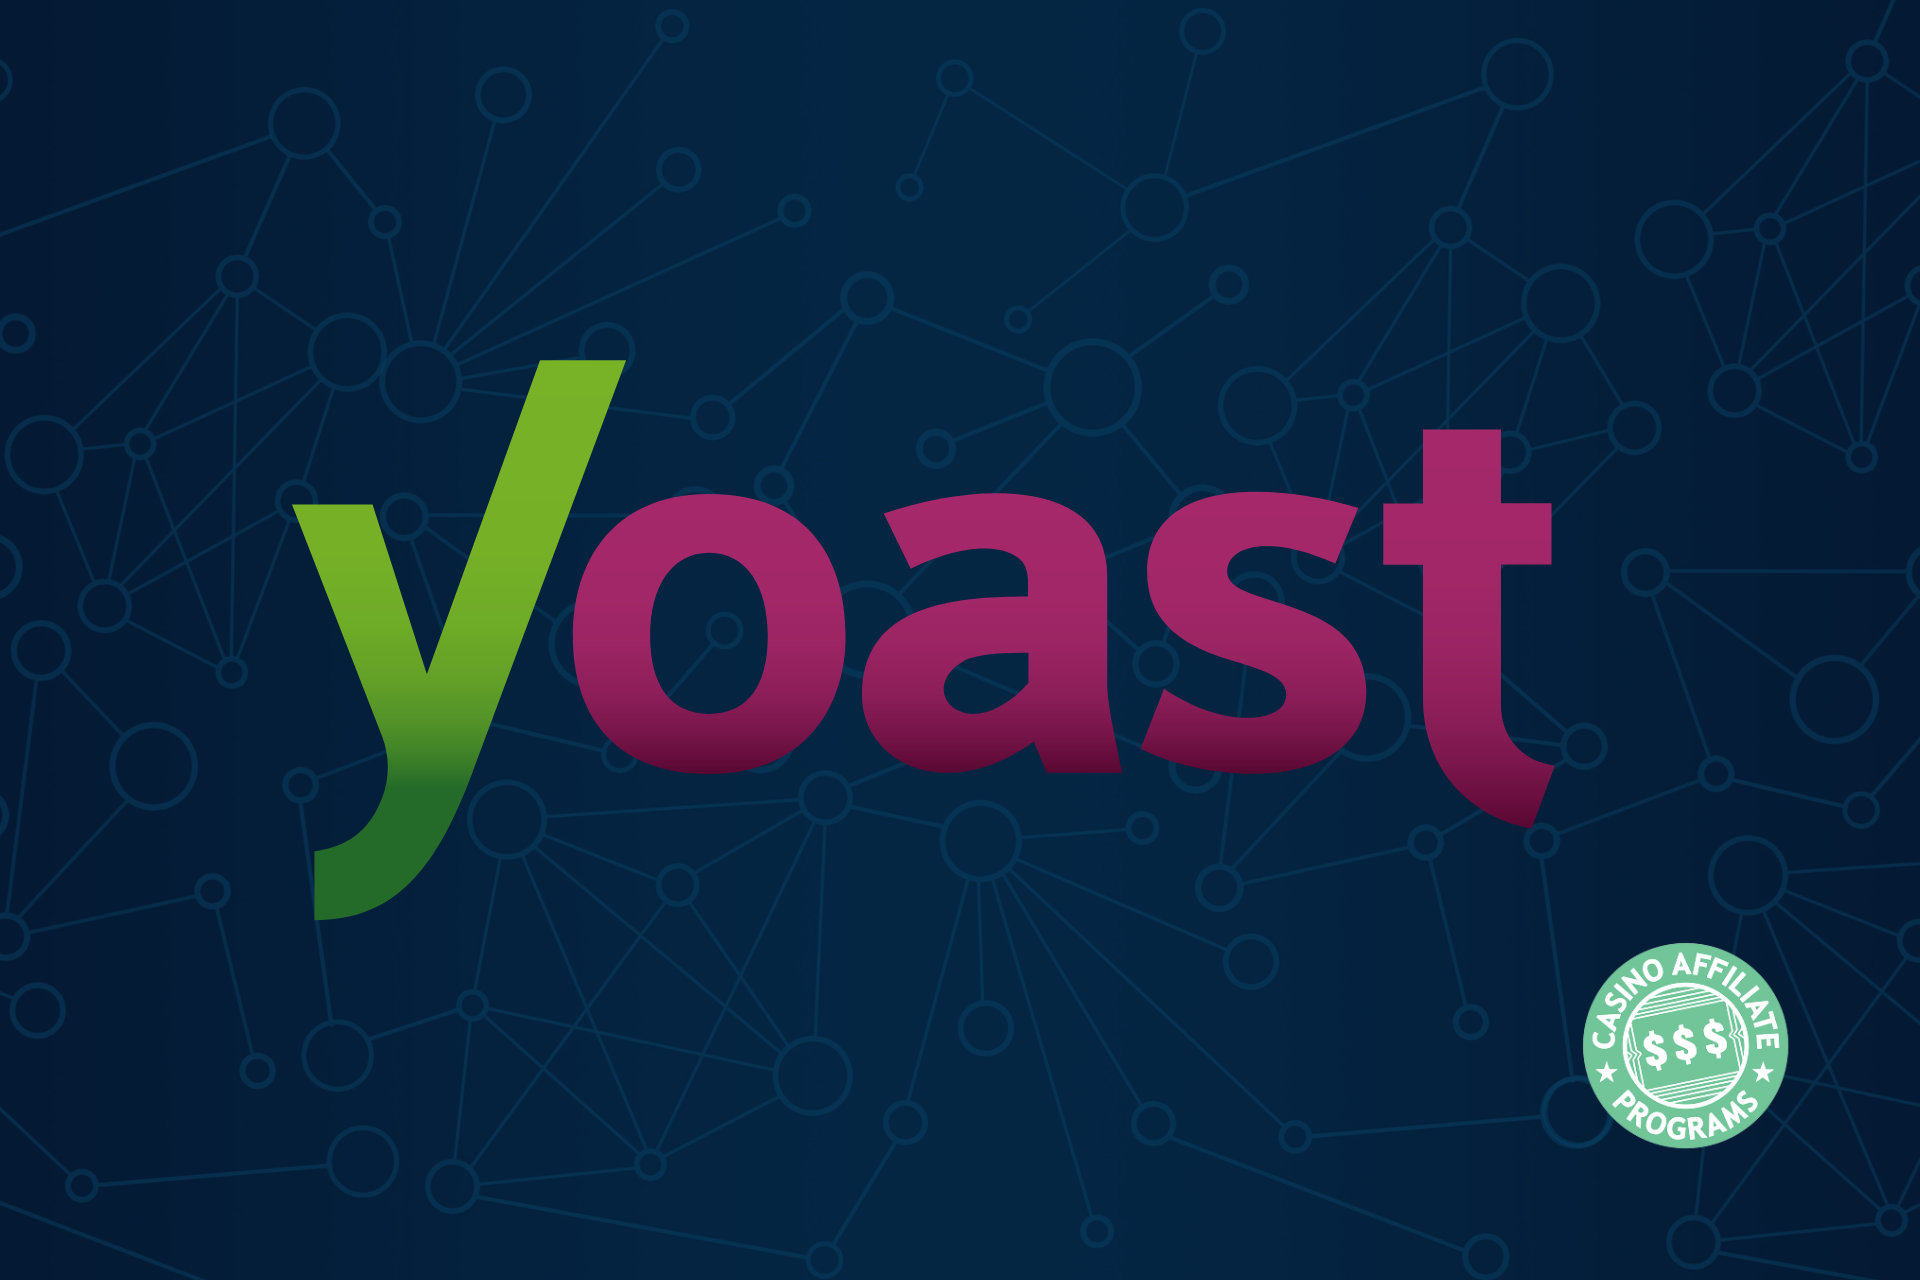 Is Yoast all it’s cracked up to be?